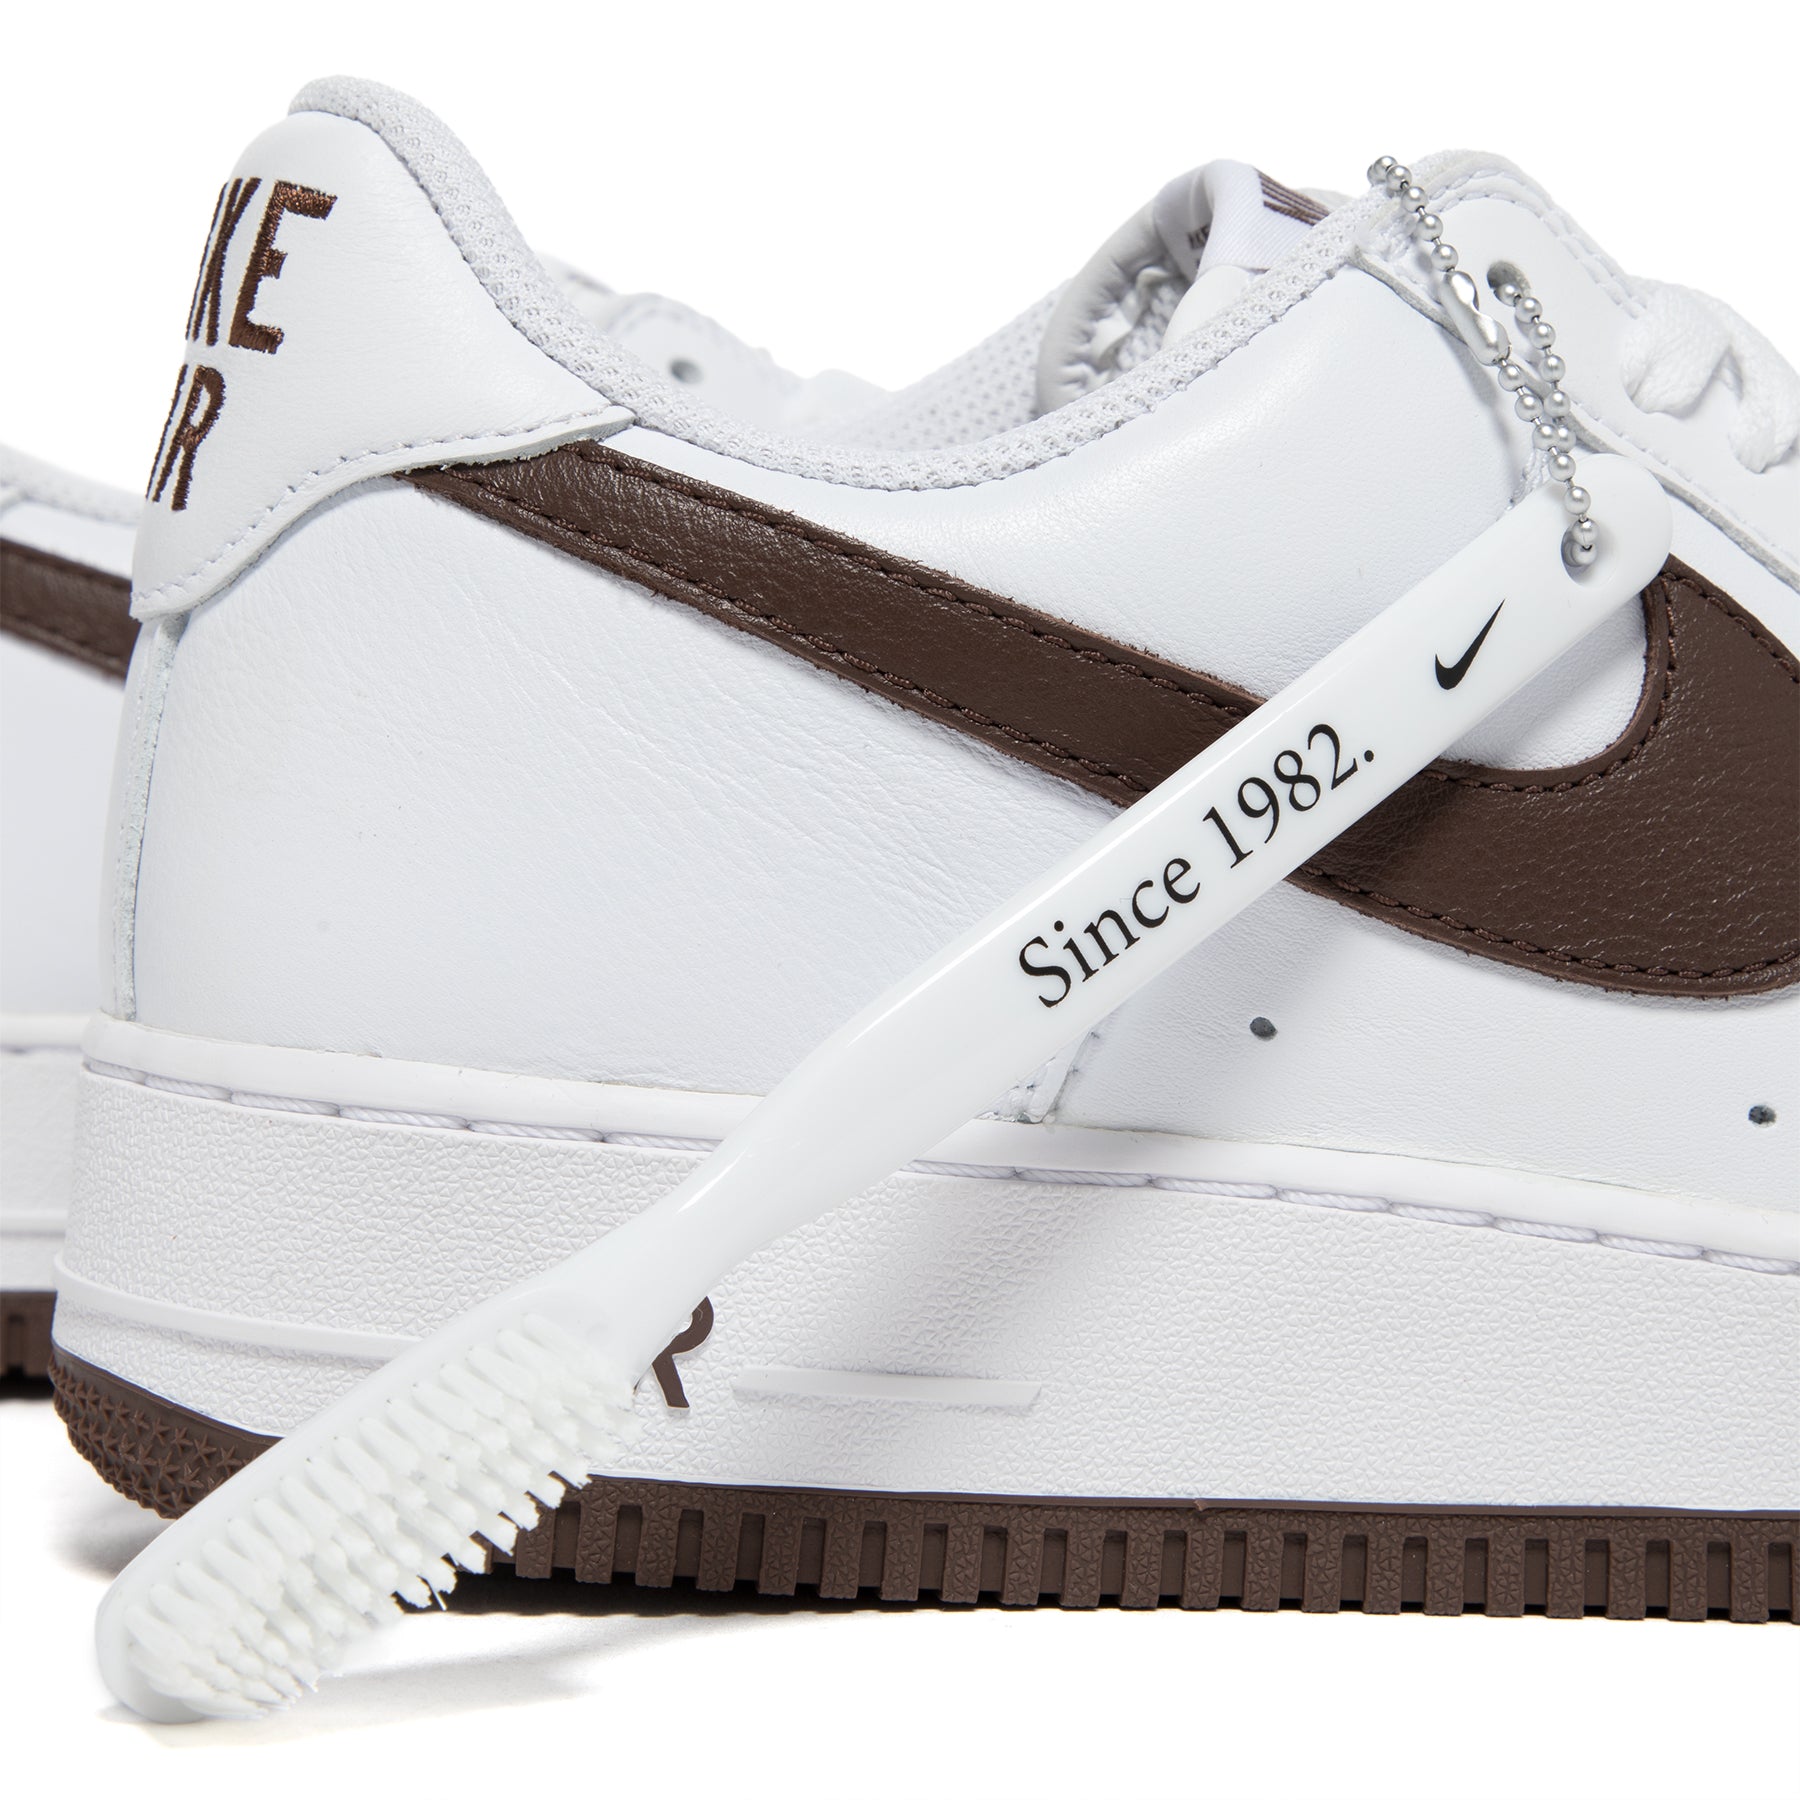 Nike Air Force 1 Low Retro (White/Chocolate/Metallic Gold) – Concepts